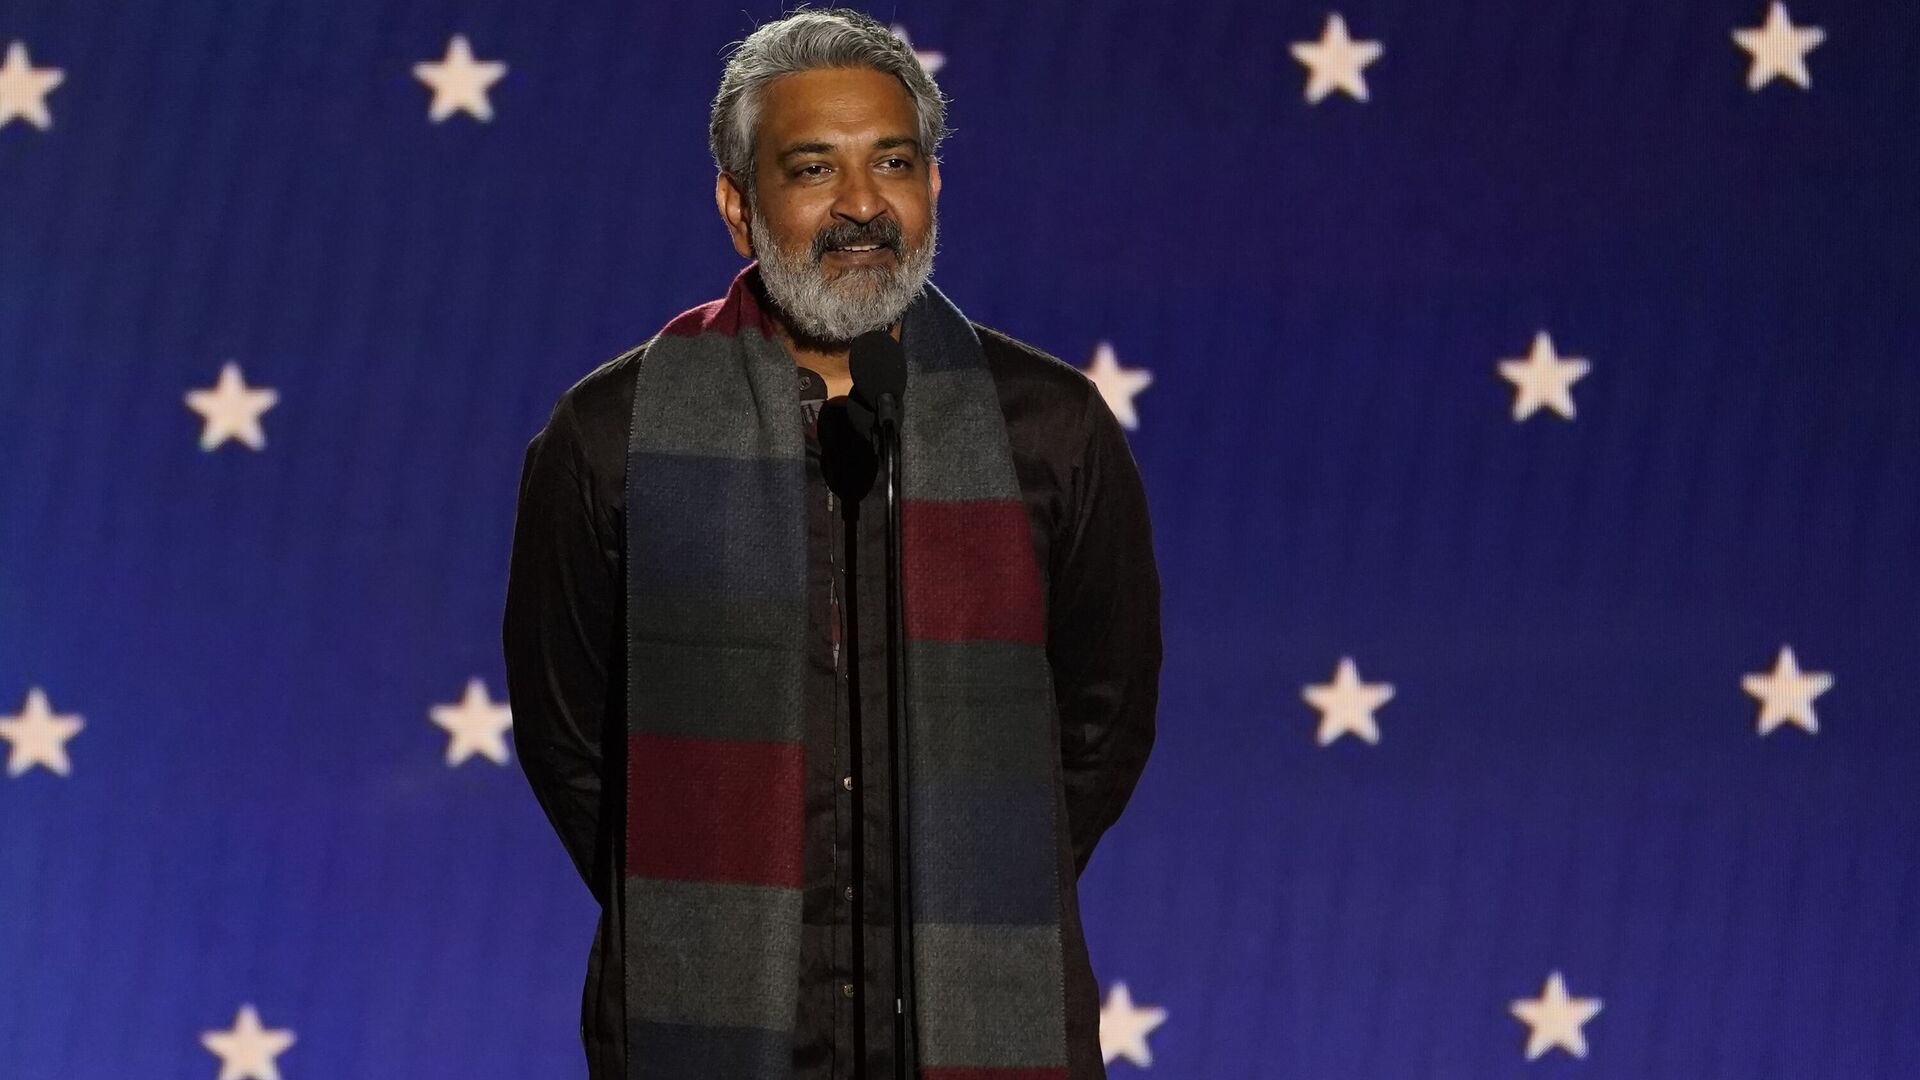 S. S. Rajamouli accepts the award for best foreign language film for RRR at the 28th annual Critics Choice Awards at The Fairmont Century Plaza Hotel on Sunday, Jan. 15, 2023, in Los Angeles. - Sputnik India, 1920, 16.01.2023